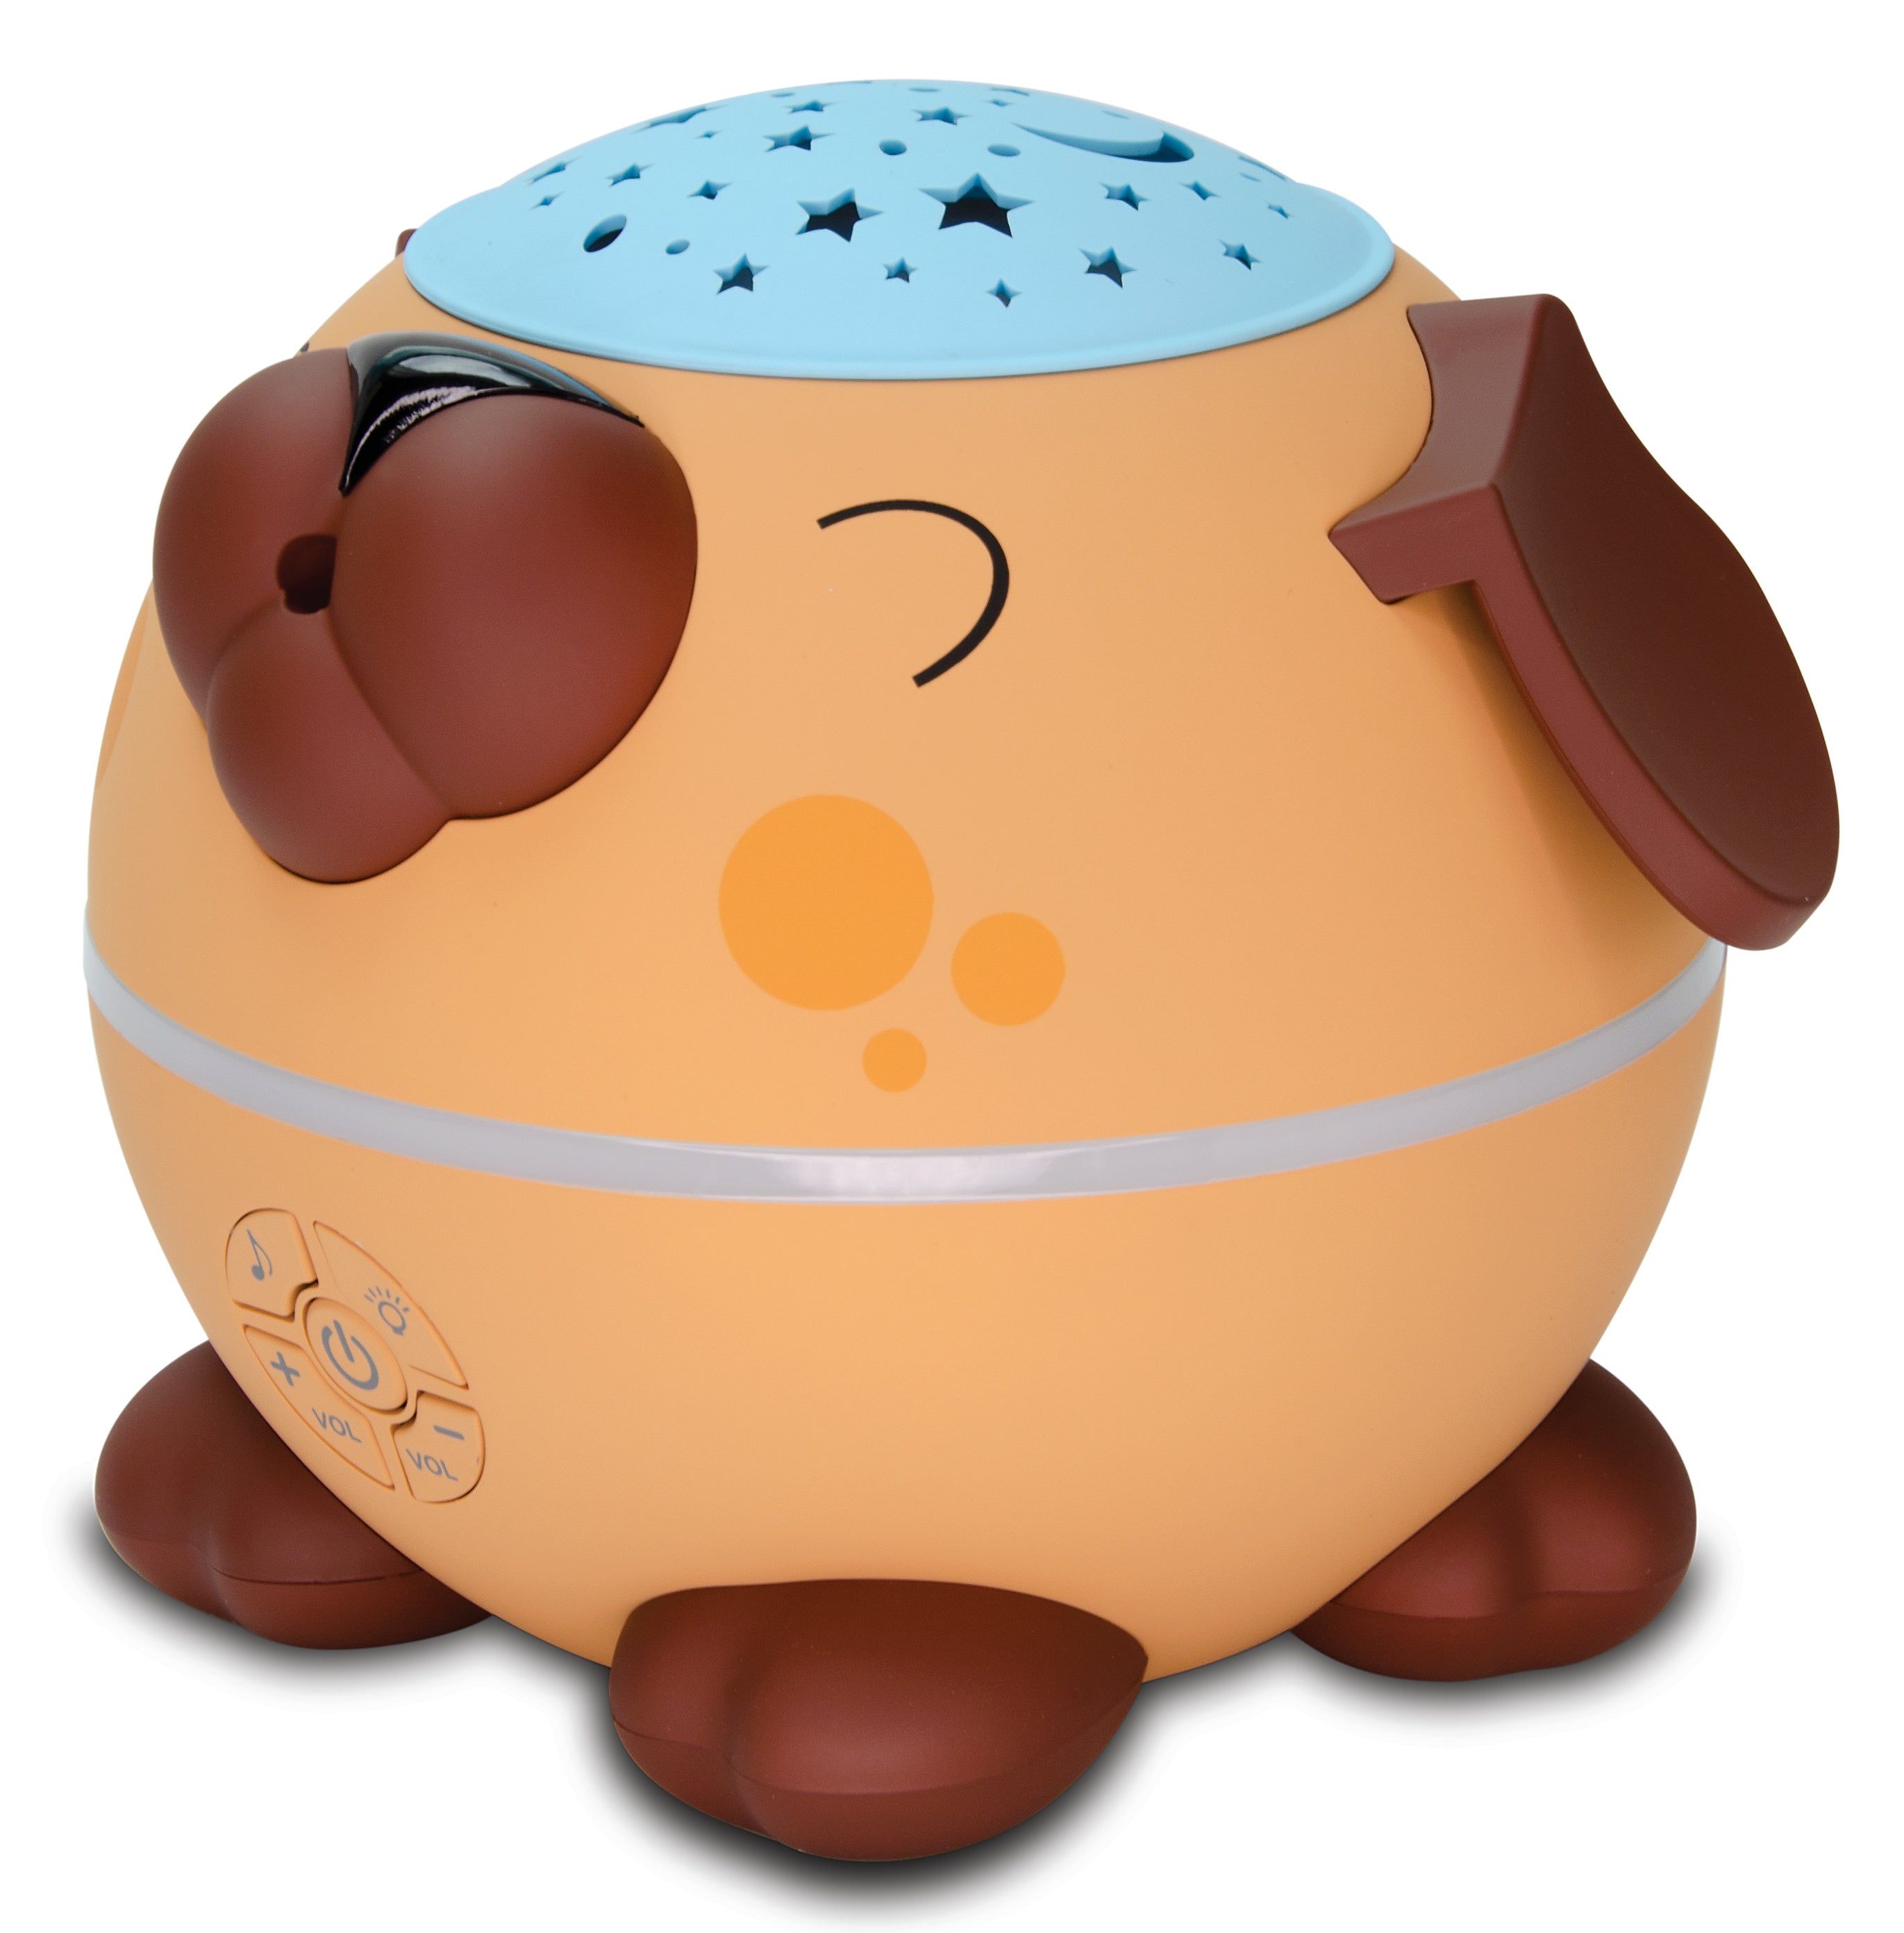 Now Ultrasonic Sleepy Puppy Diffuser with Sound and Projections